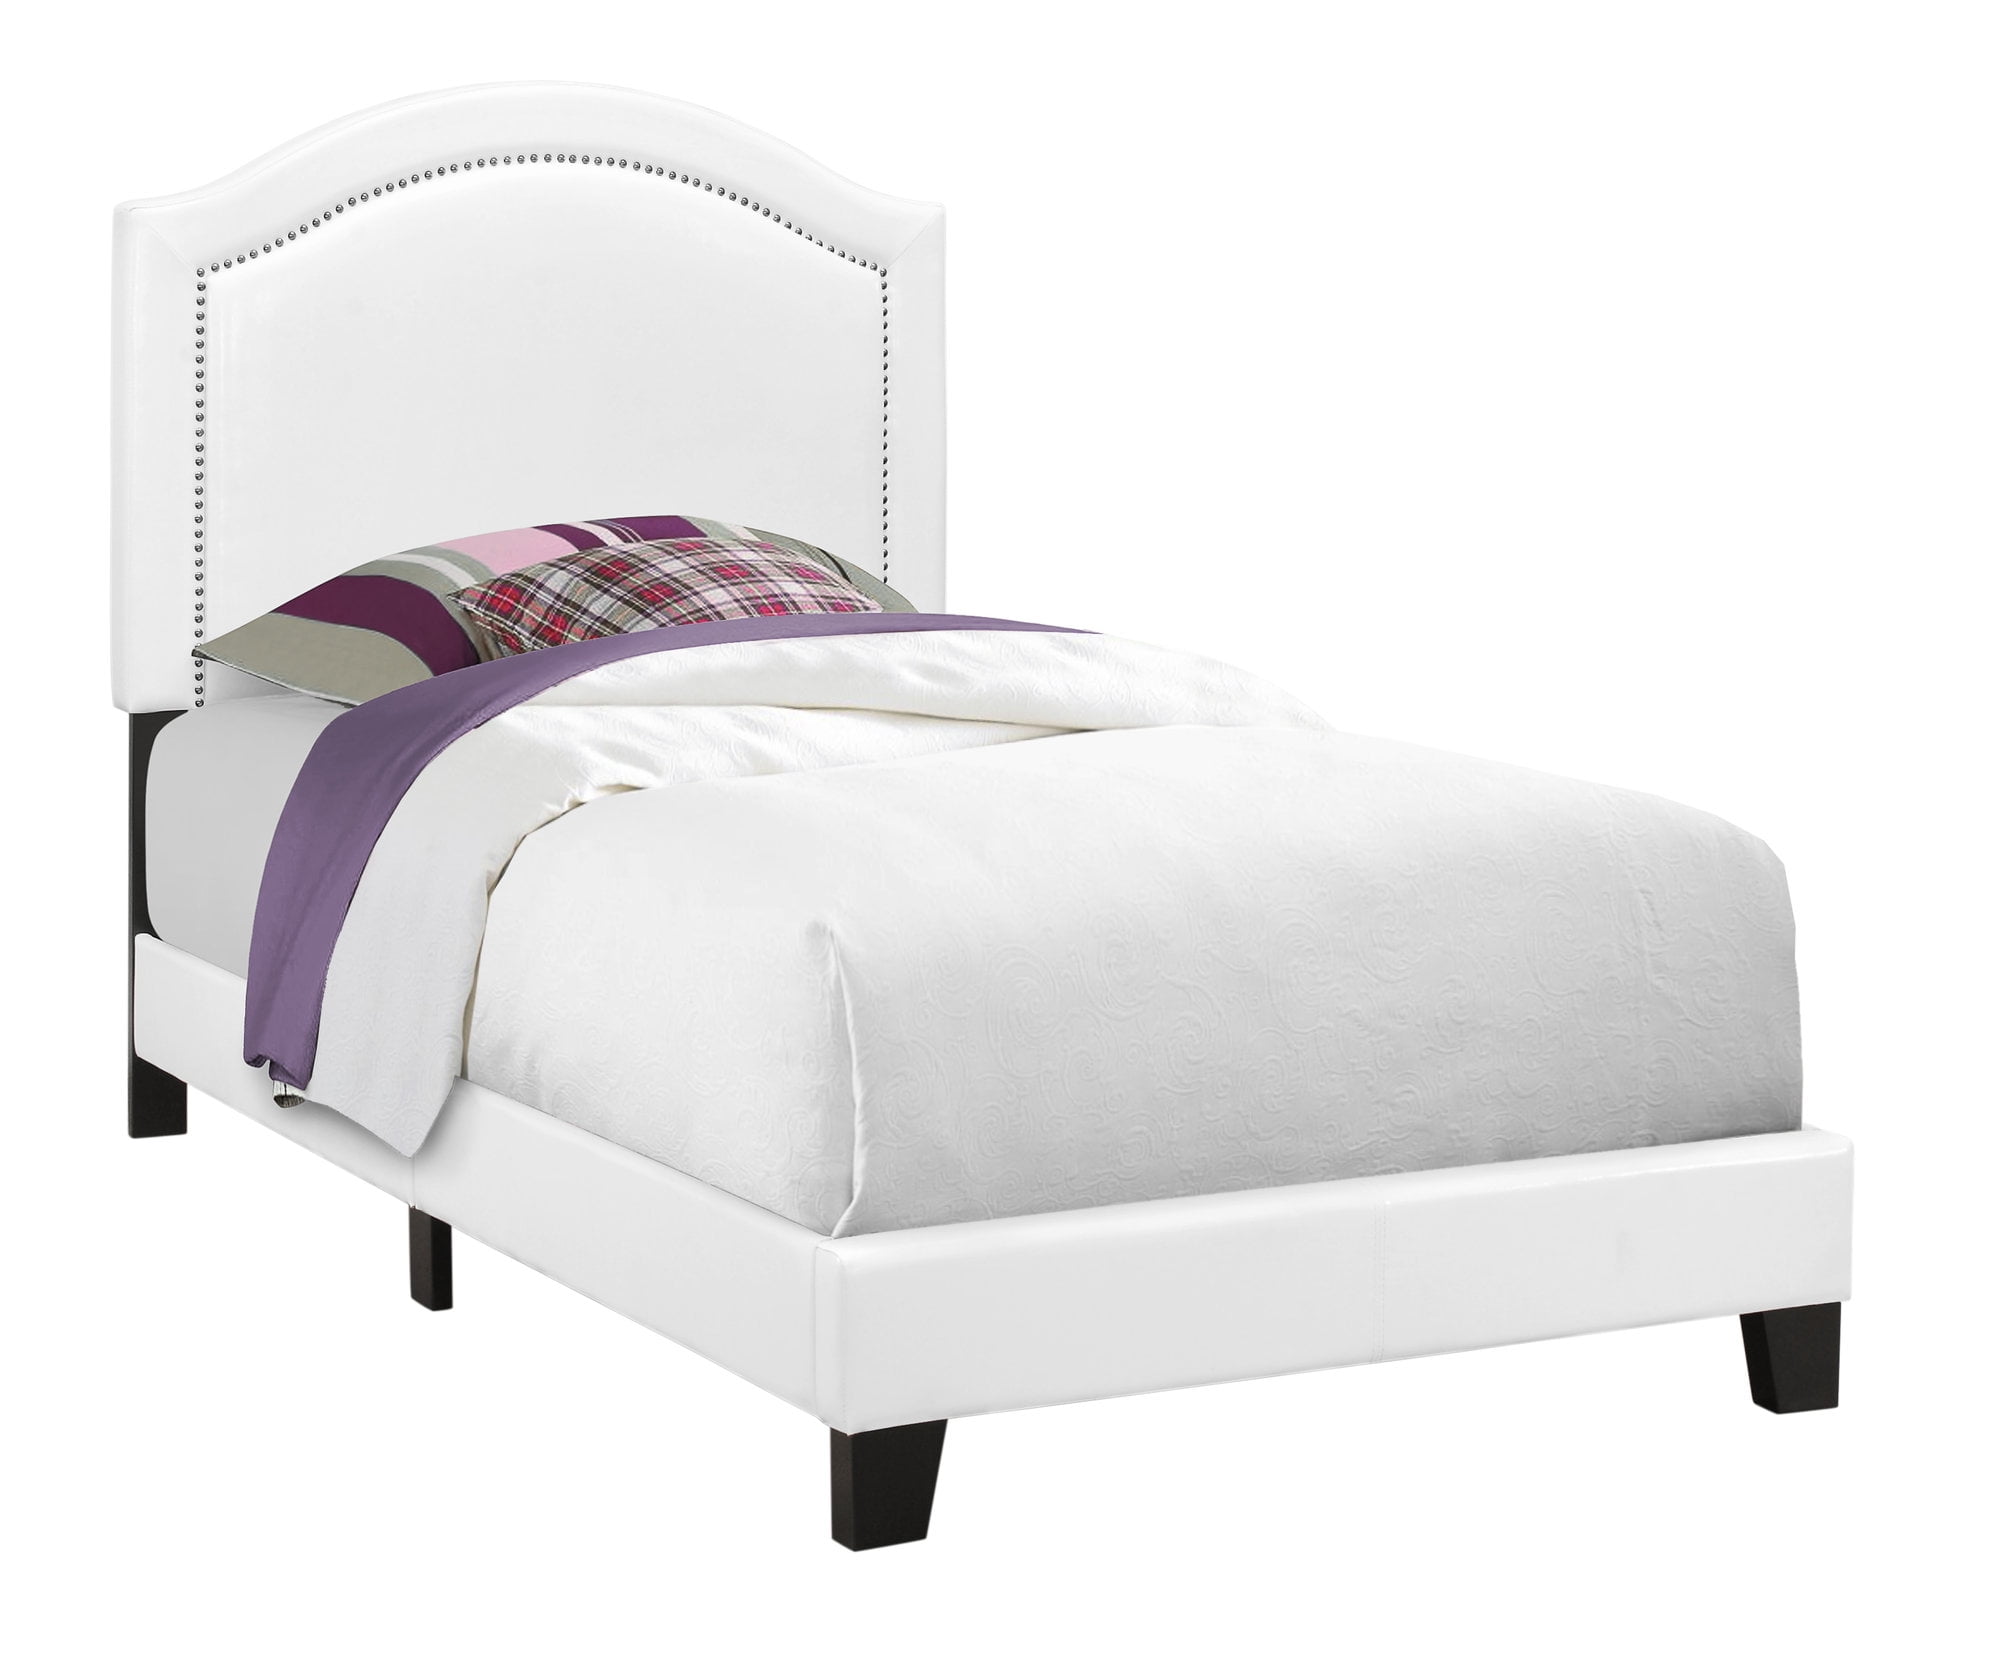 80.25" White Contemporary Style Rectangular Bed Frame - Twin Size